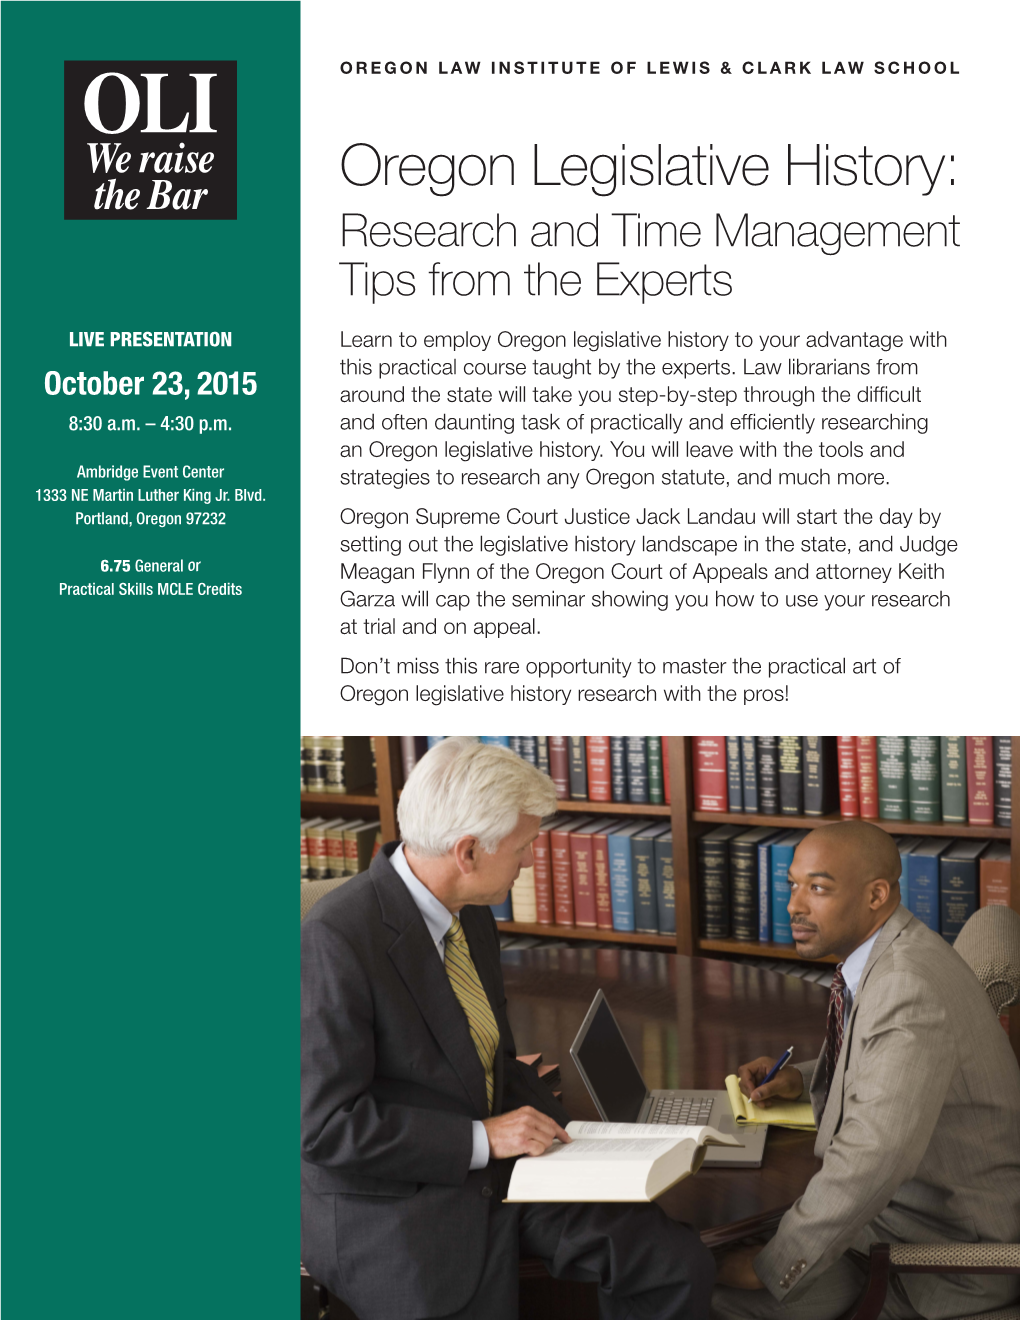 Oregon Legislative History: Research and Time Management Tips from the Experts